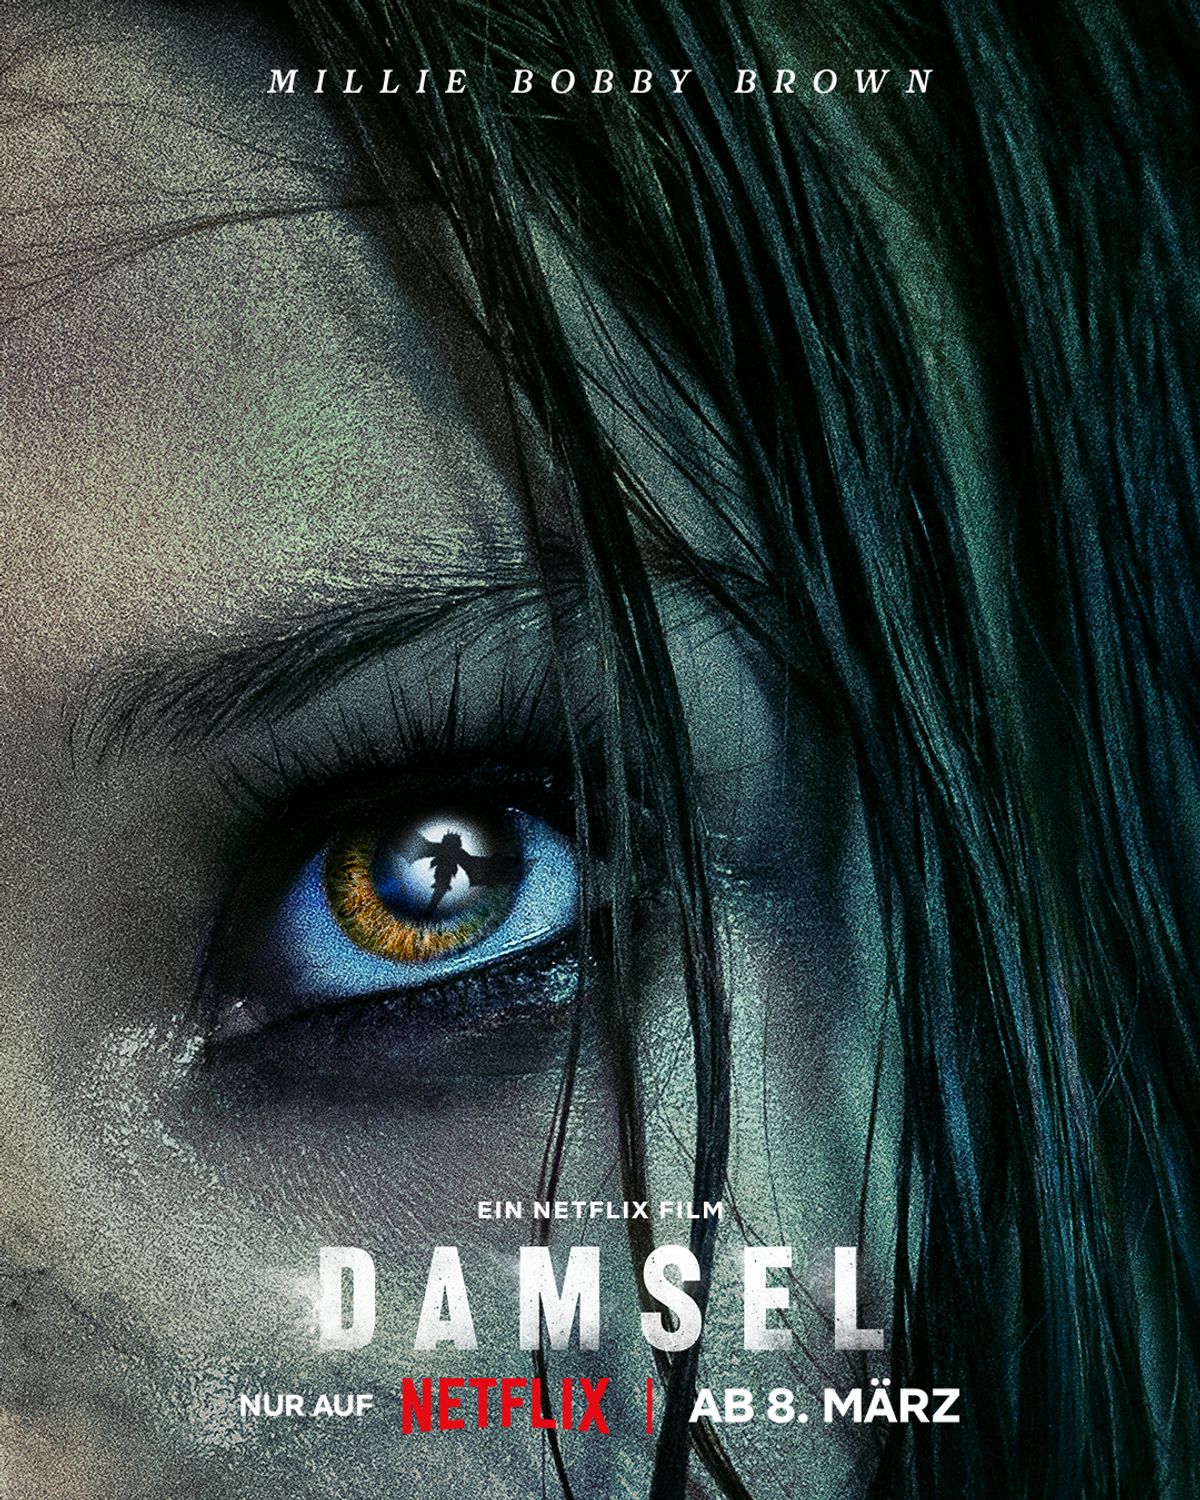 New poster and start date for "Damsel" with Millie Bobby Brown released -  Movie & Show News | KinoCheck